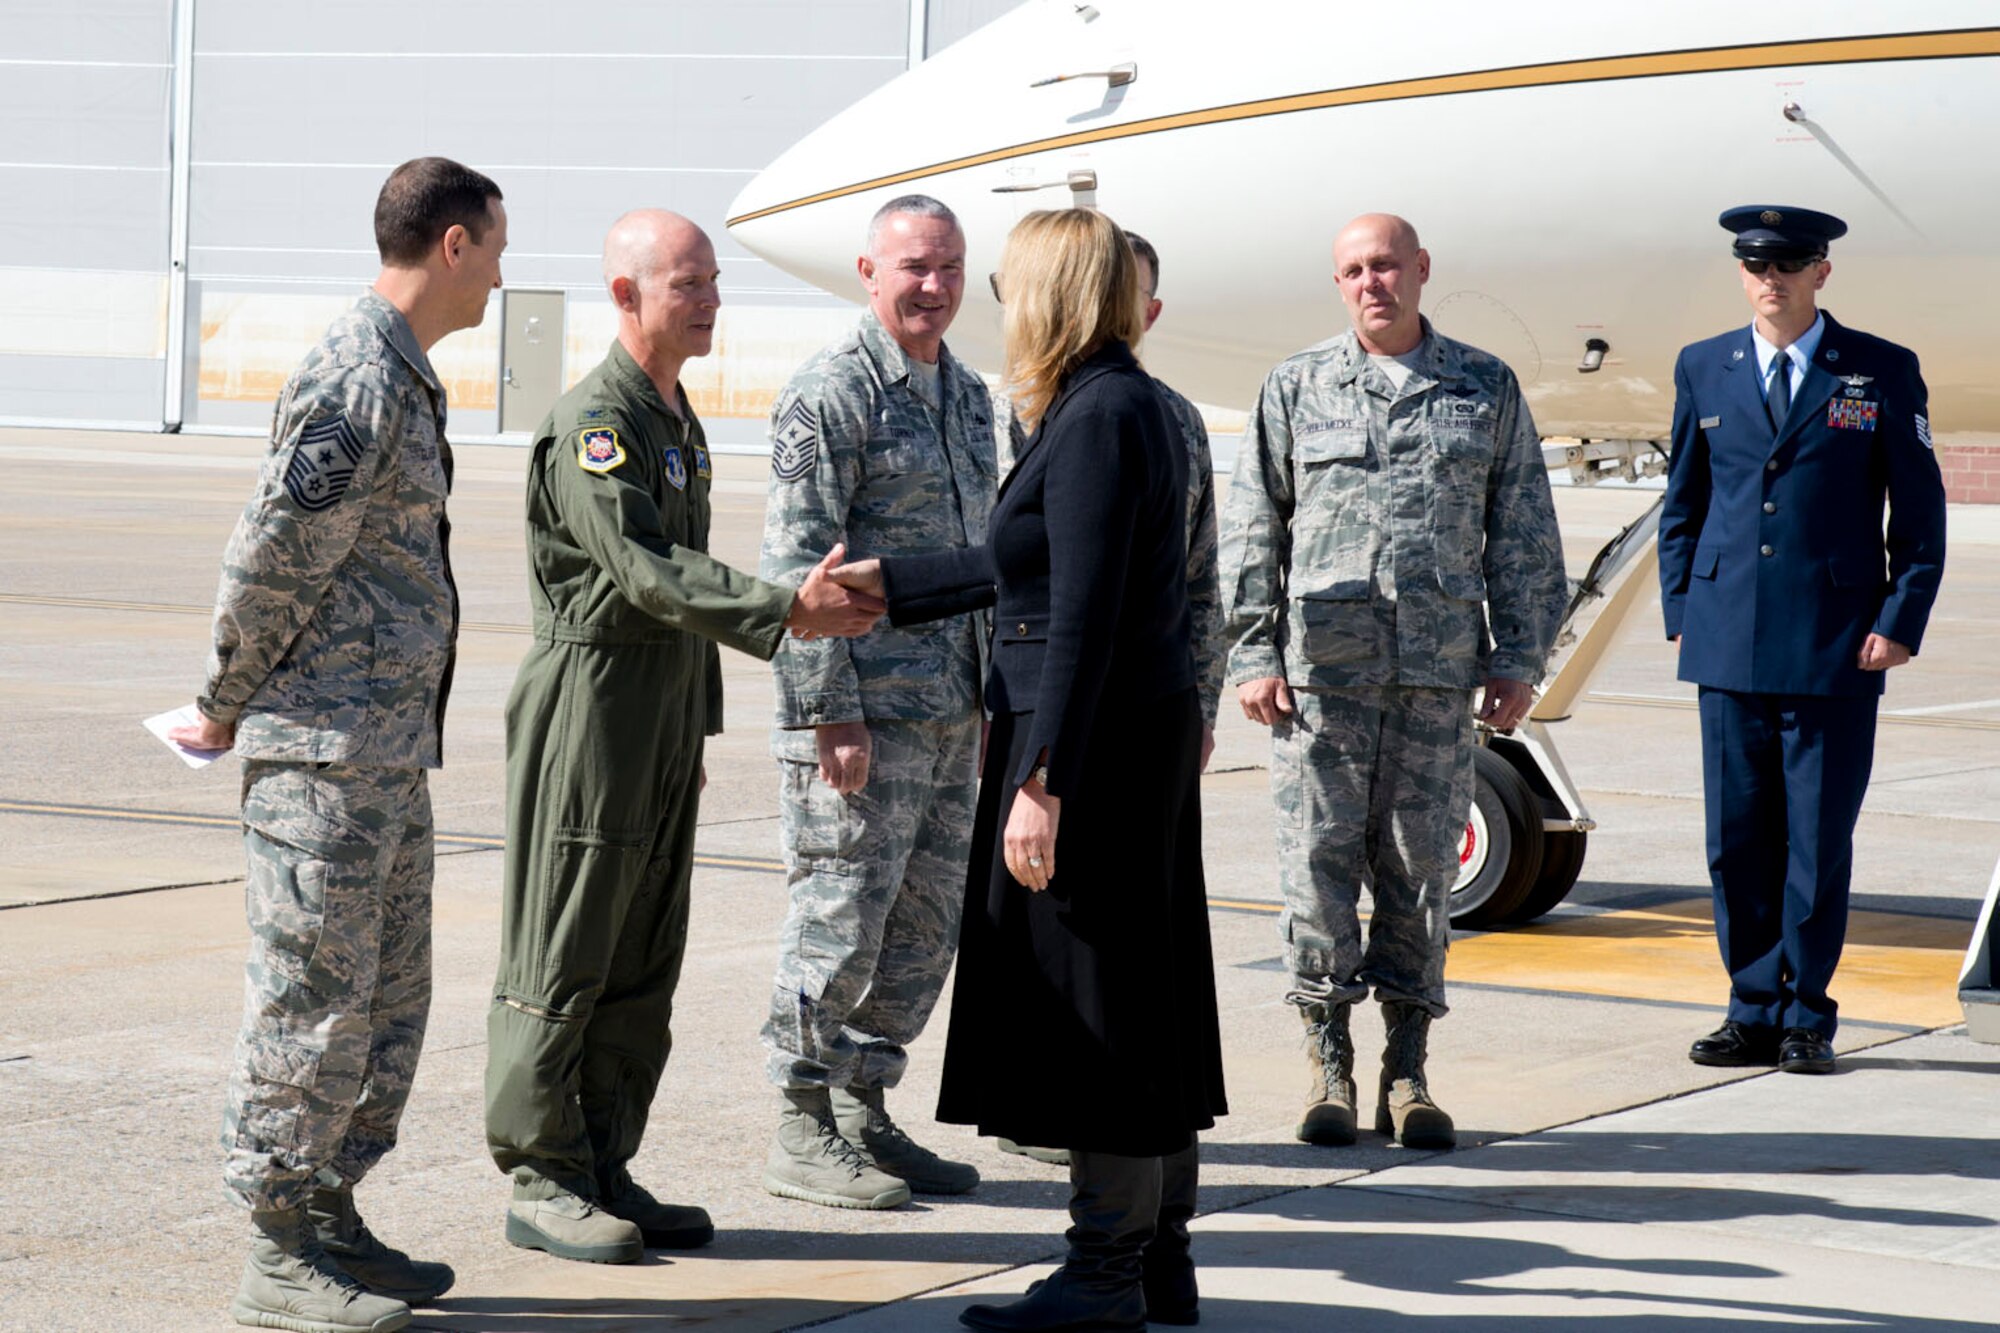 MARTINSBURG, W.Va.-- Secretary of the Air Force Deborah Lee James shakes hands with Col. Shaun J. Perkowski, commander of the 167th Airlift Wing in Martinsburg, W.Va. James visited the 167th to learn about their recent mission conversion to the C-17 Globemaster and the West Virginia Air National Guard.  Launching the first C-17 mission less than three months after the first aircraft arrival, unit members discussed new opportunities and capabilities for the Total Force. James also met with wing Airmen to address questions about the future of the Air Force and Air National Guard.  (U.S. Air National Guard photo by Staff Sgt. Jodie Witmer /Released)